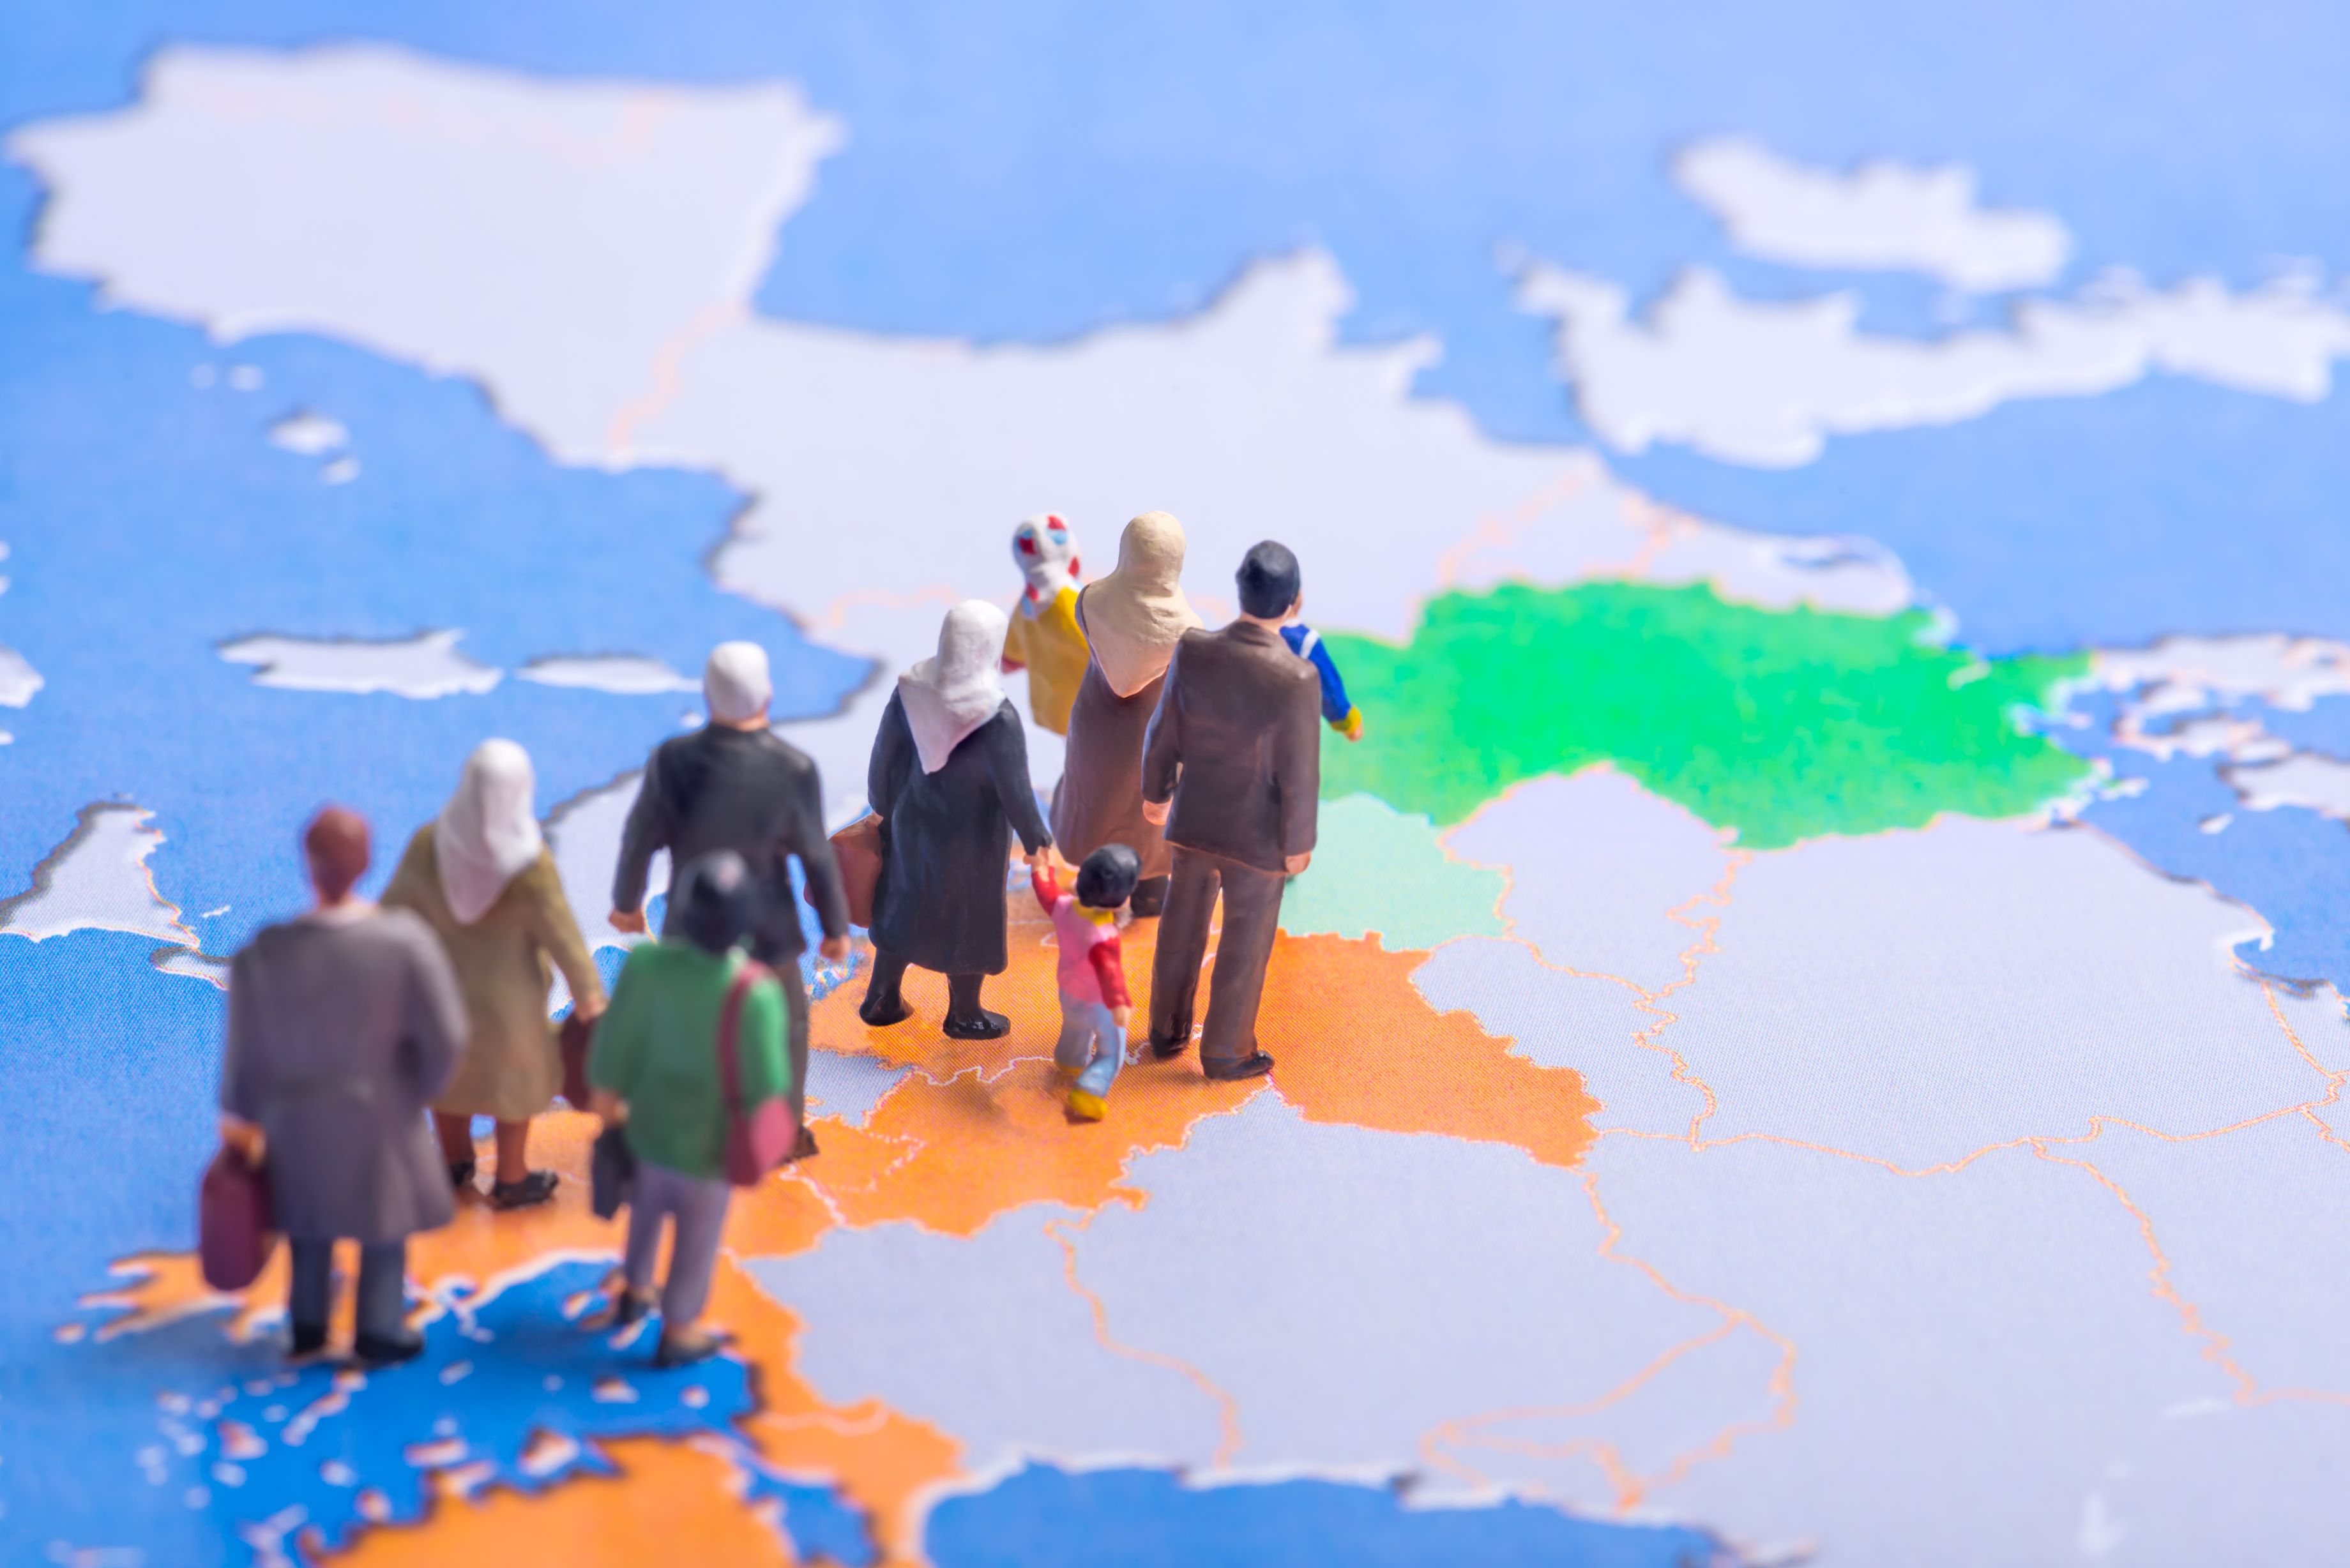 figurines of migrats making their way across Europe